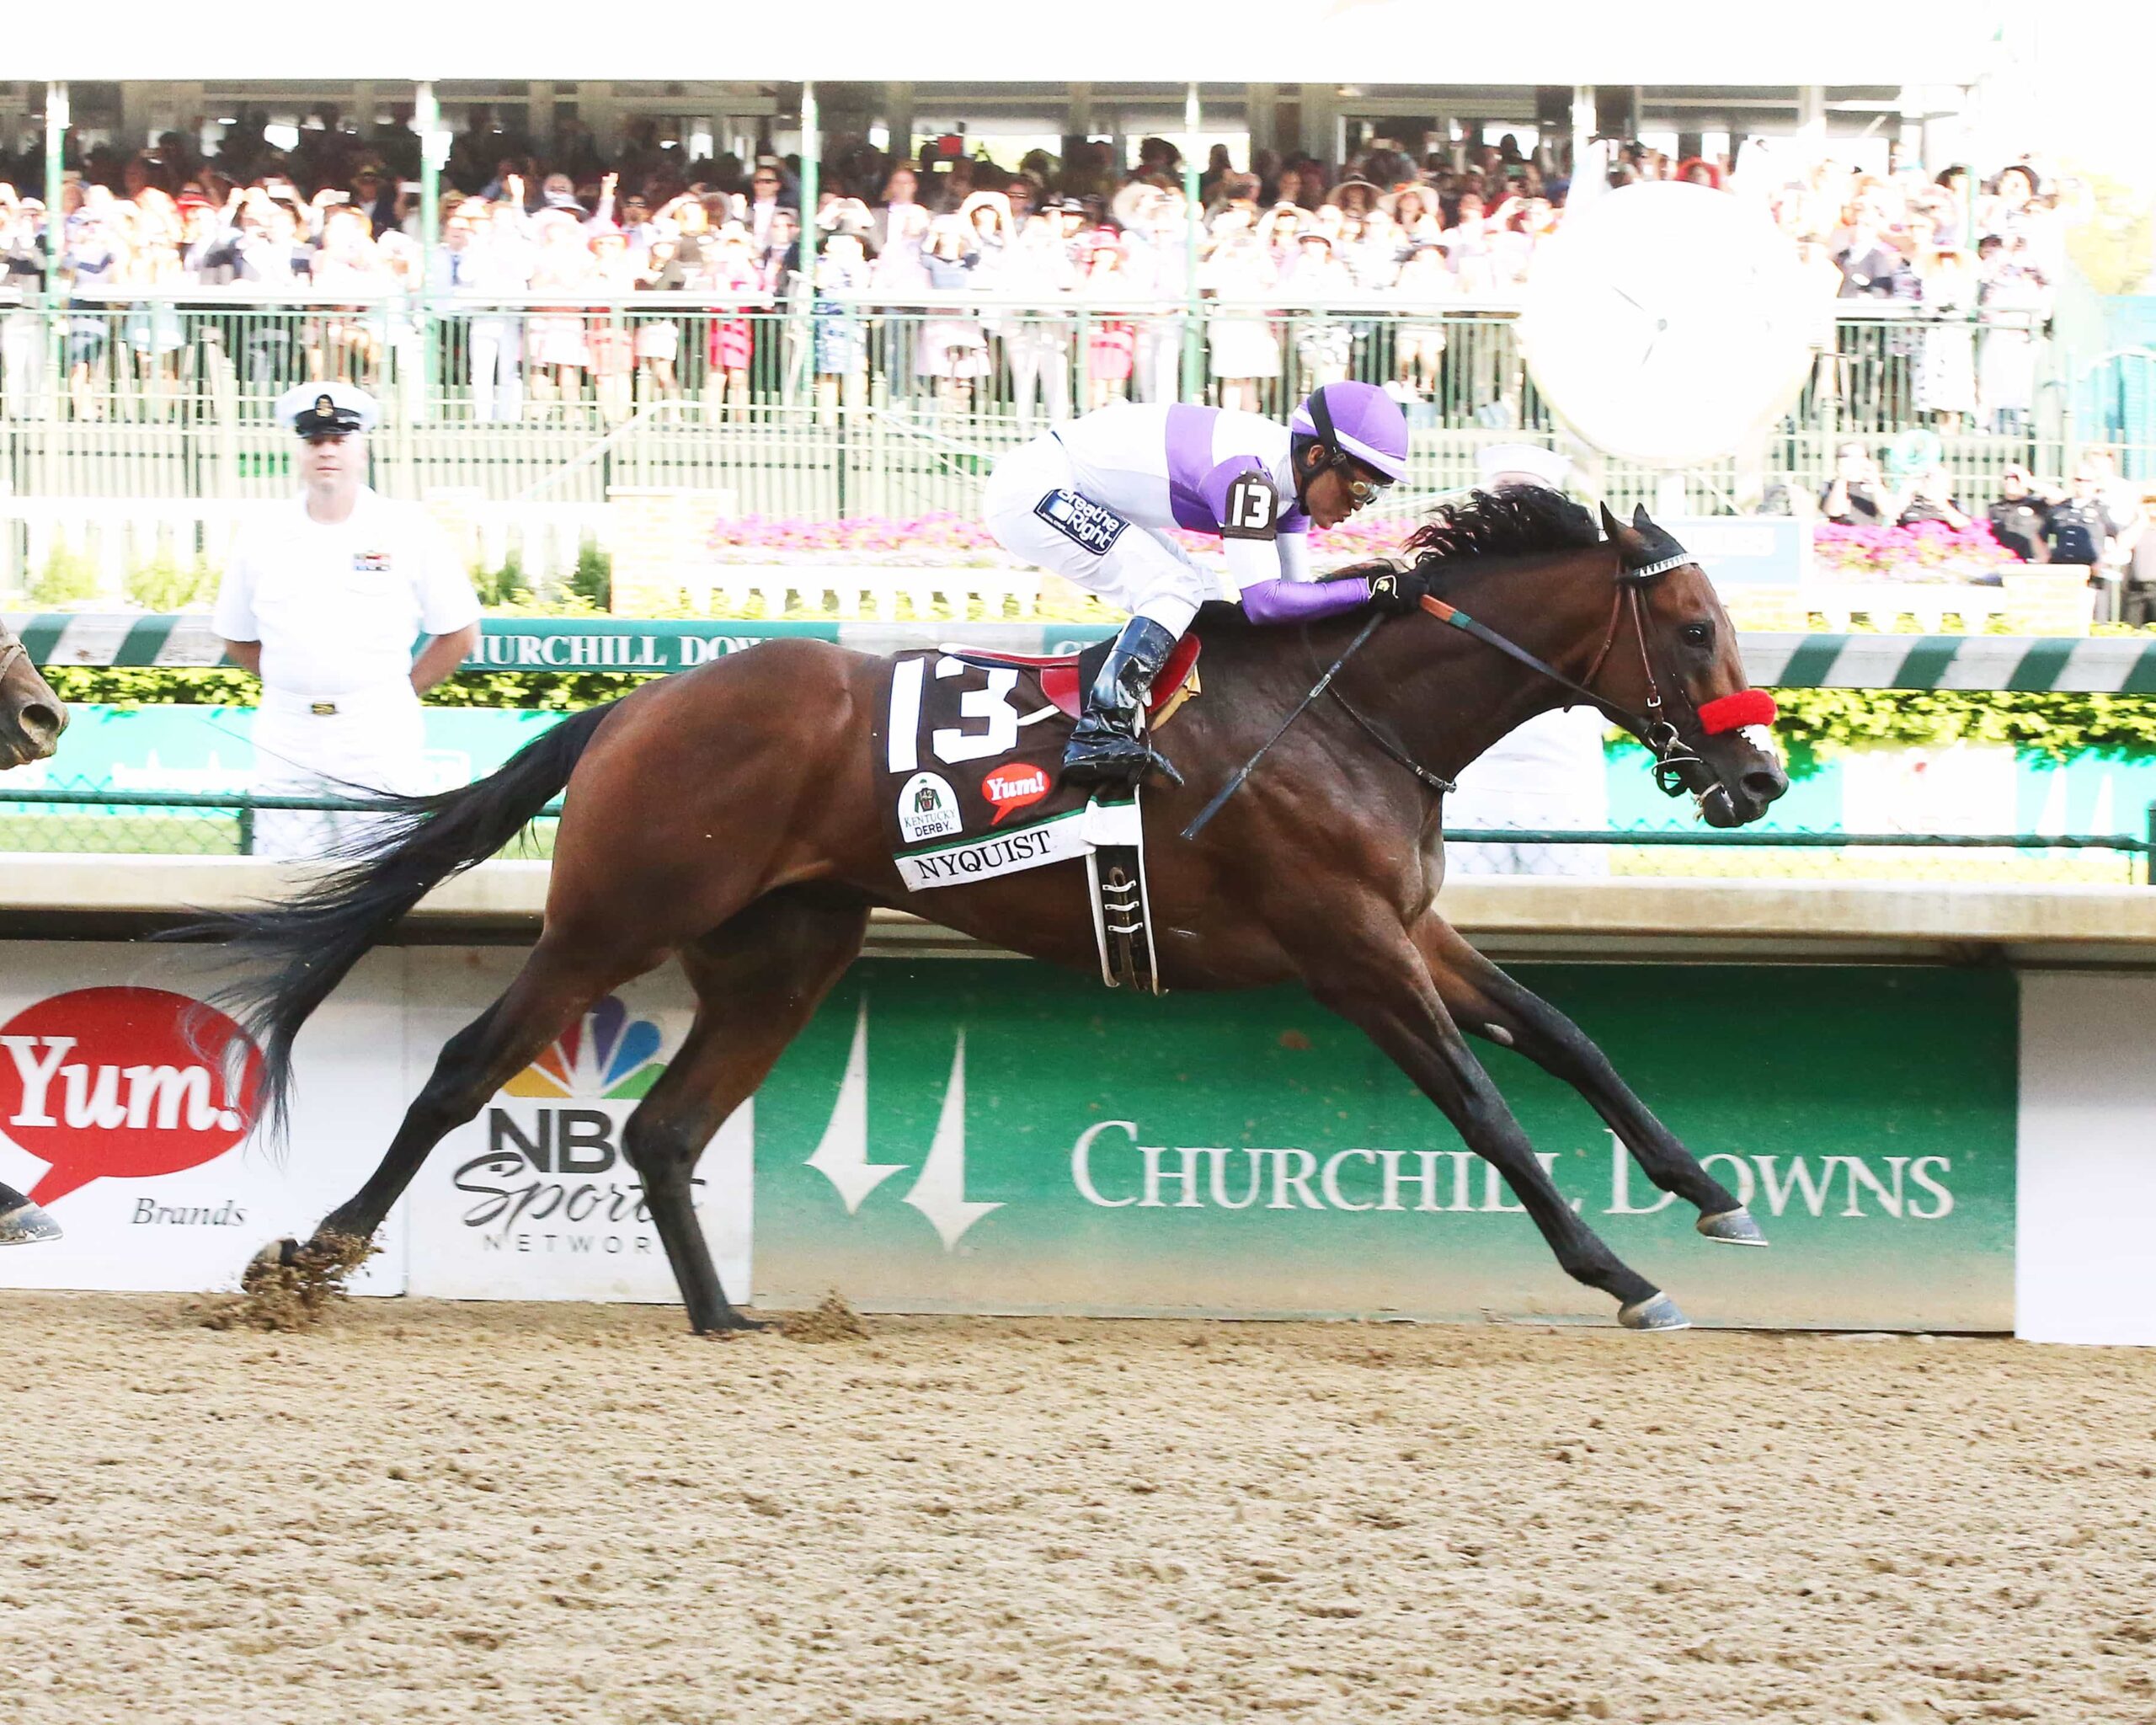 Kentucky Derby Trip Notes and Analysis